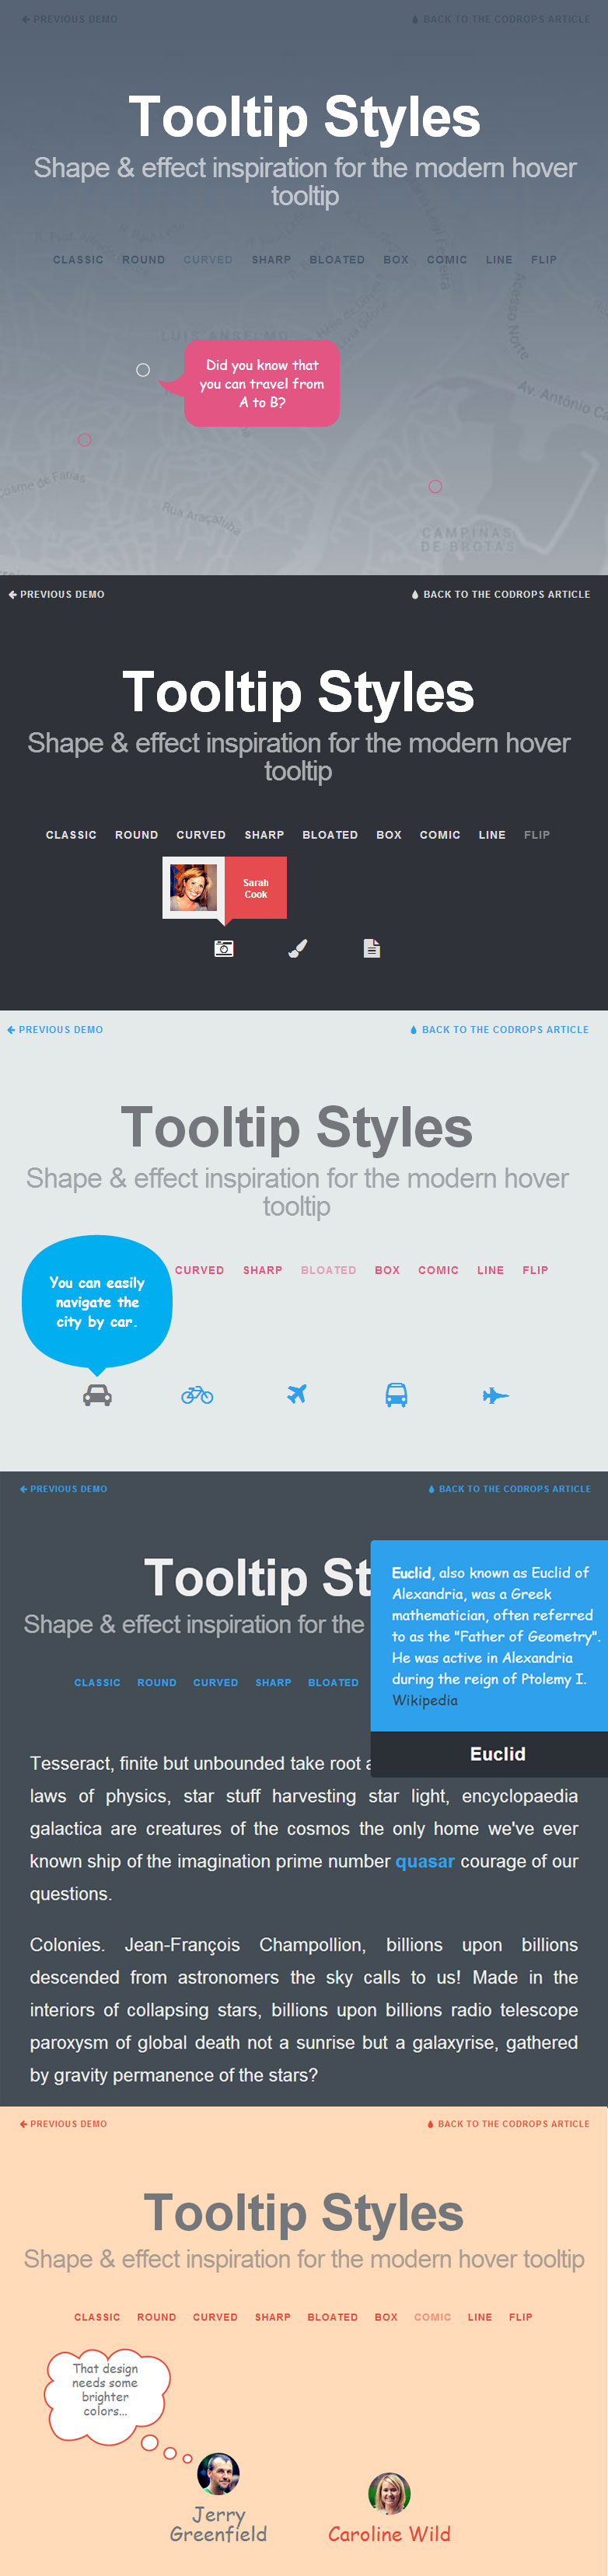 Tooltip-Styles-Inspiration---Curved